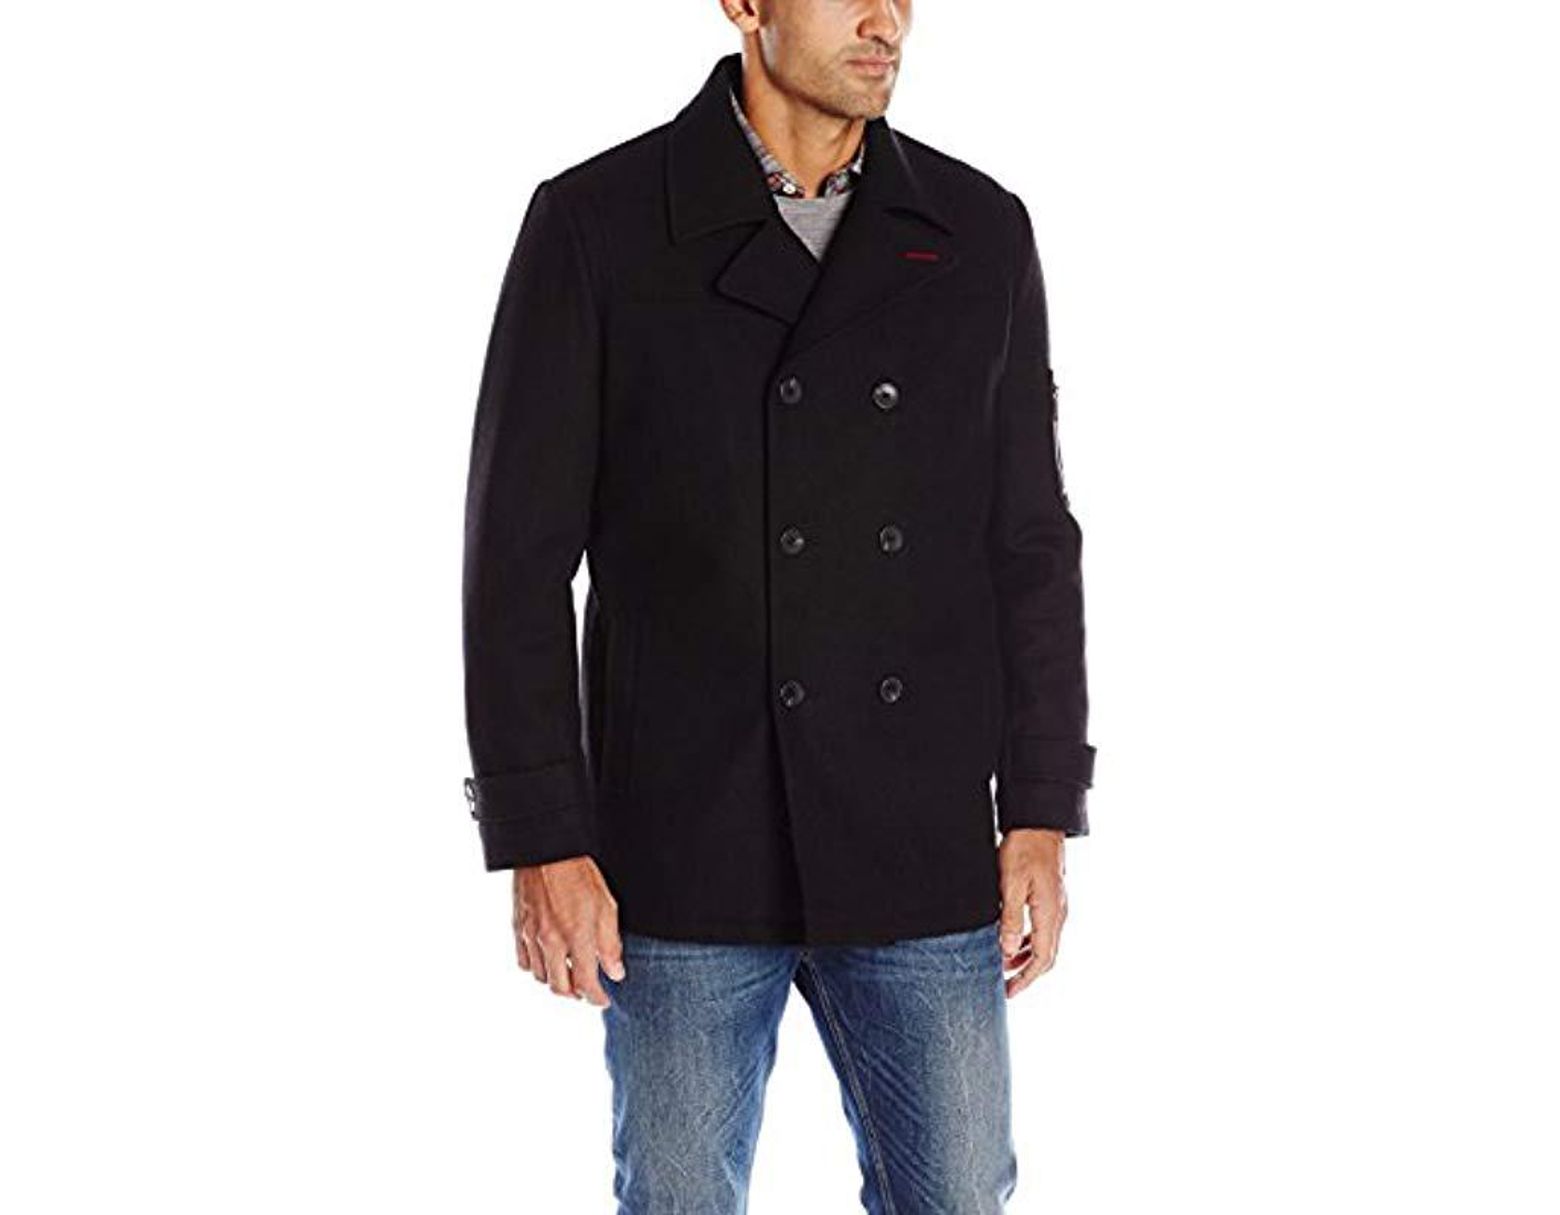 Kankanluck Men Autumn Casual Single Breasted Solid Mid Topcoat Business Peacoat 